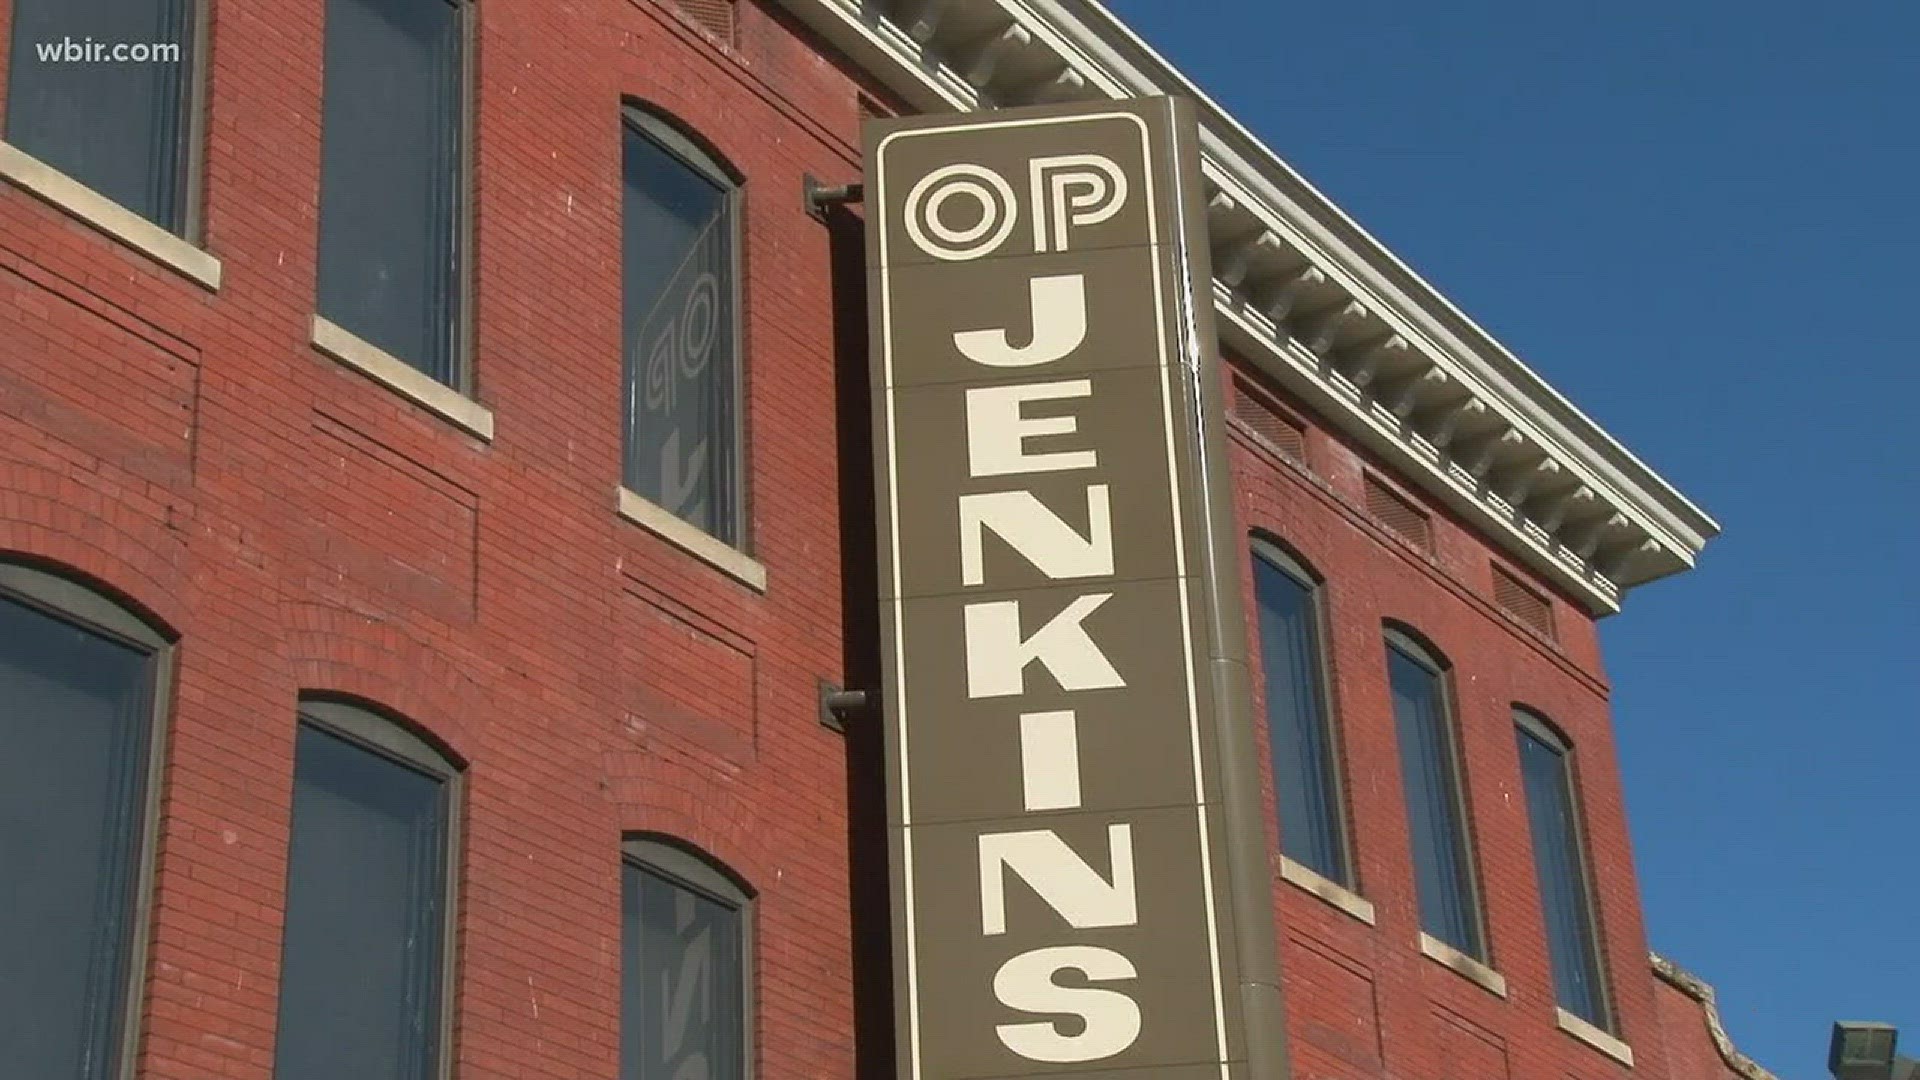 O.P. Jenkins building is one of the oldest and most beautiful in downtown Knoxville.
December 11, 2017-4pm